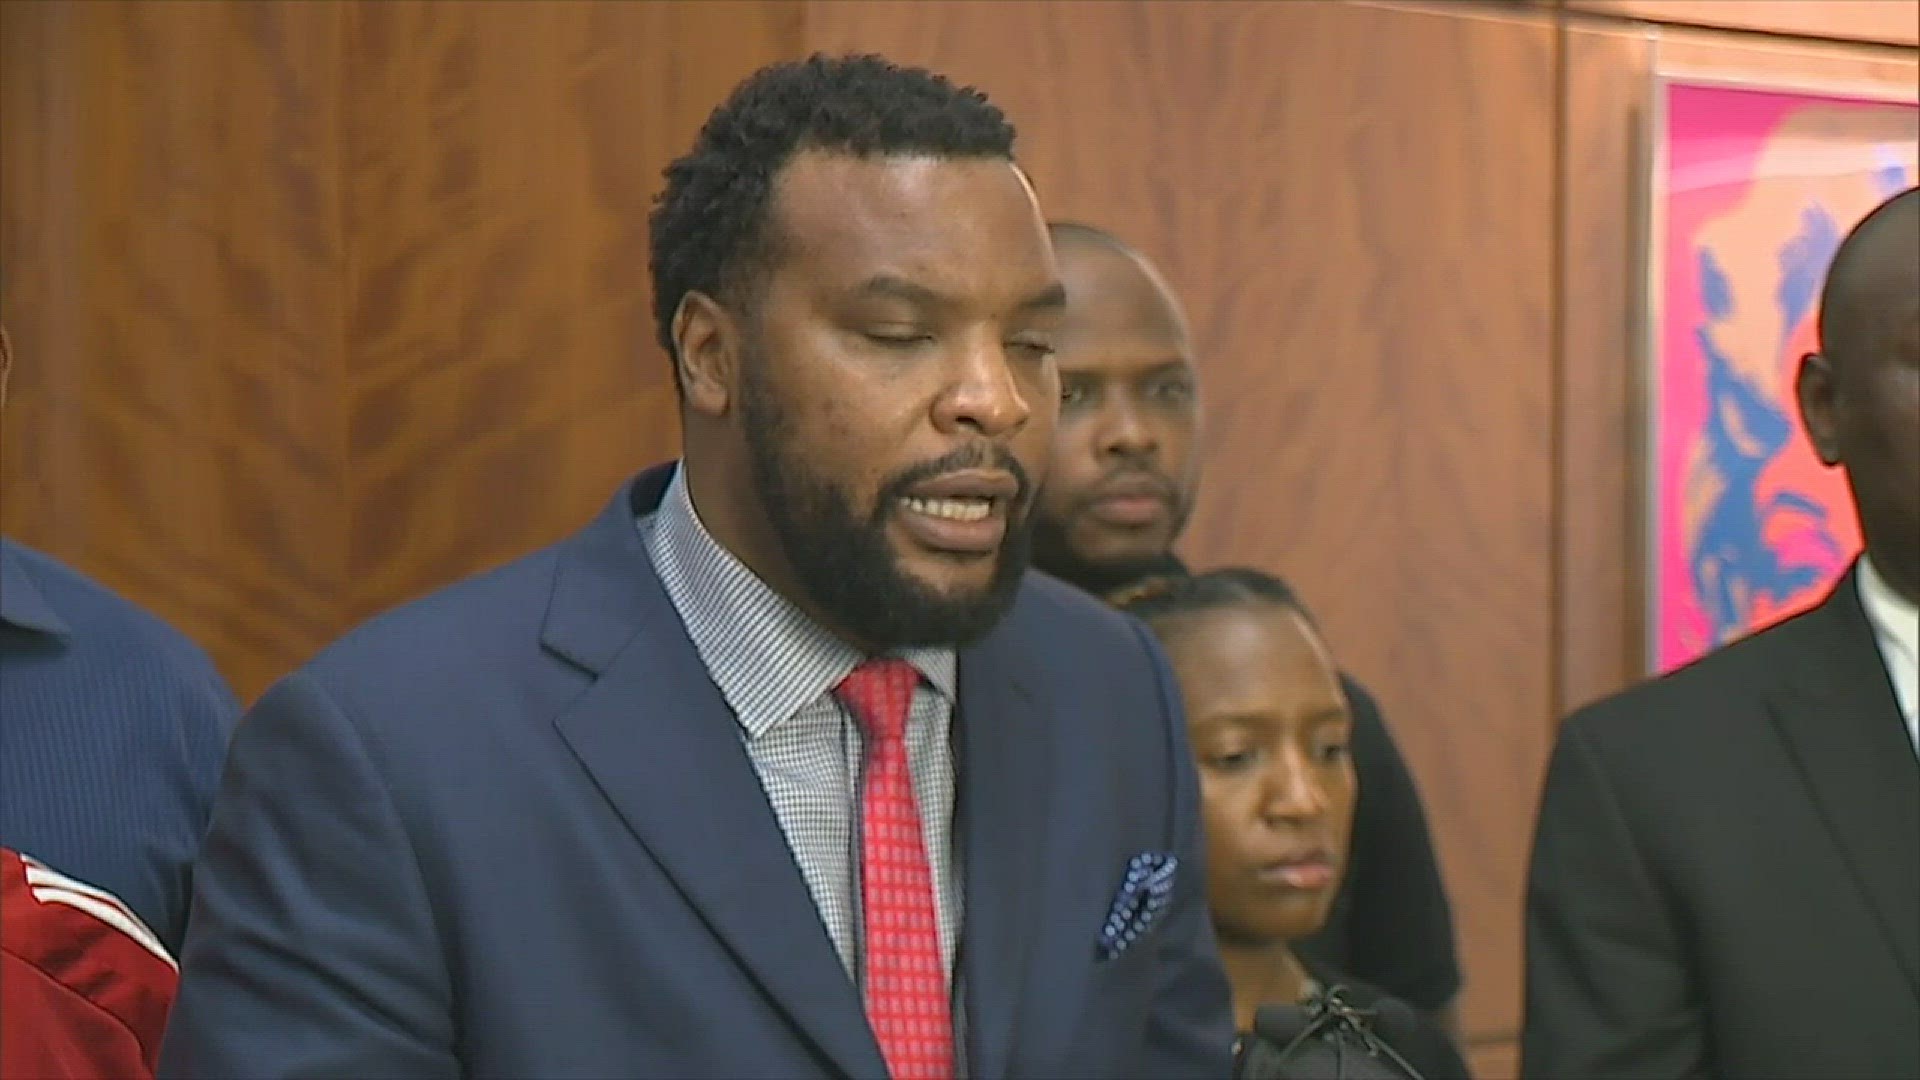 Attorney Lee Merritt appeared with the family of Botham Jean to call for the termination of Officer Amber Guyger